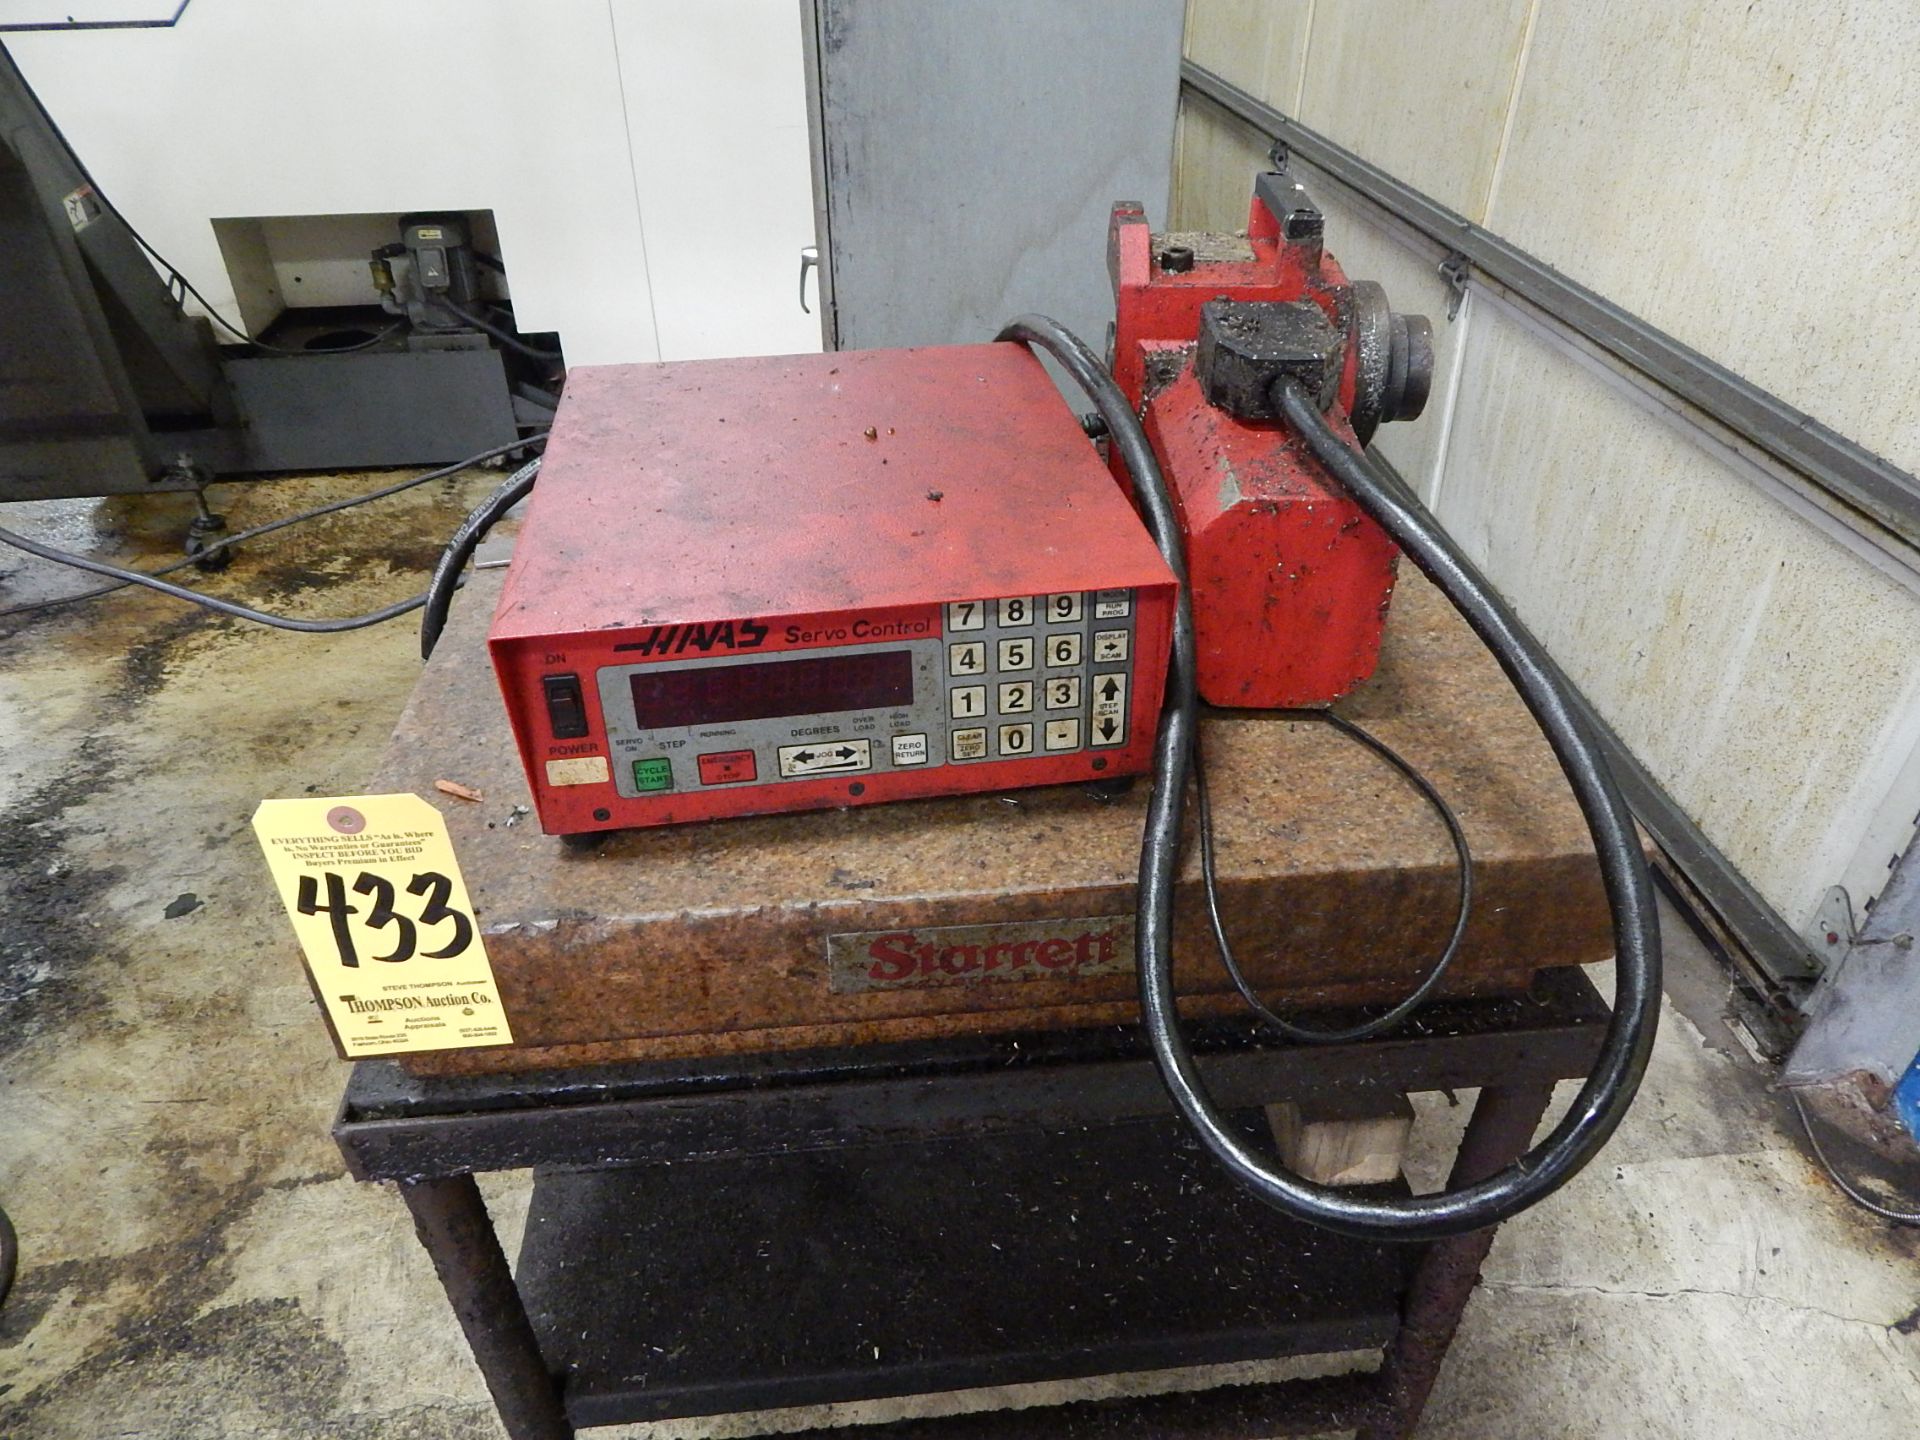 Haas 5C Indexer with Haas Controller and Granite Surface Plate